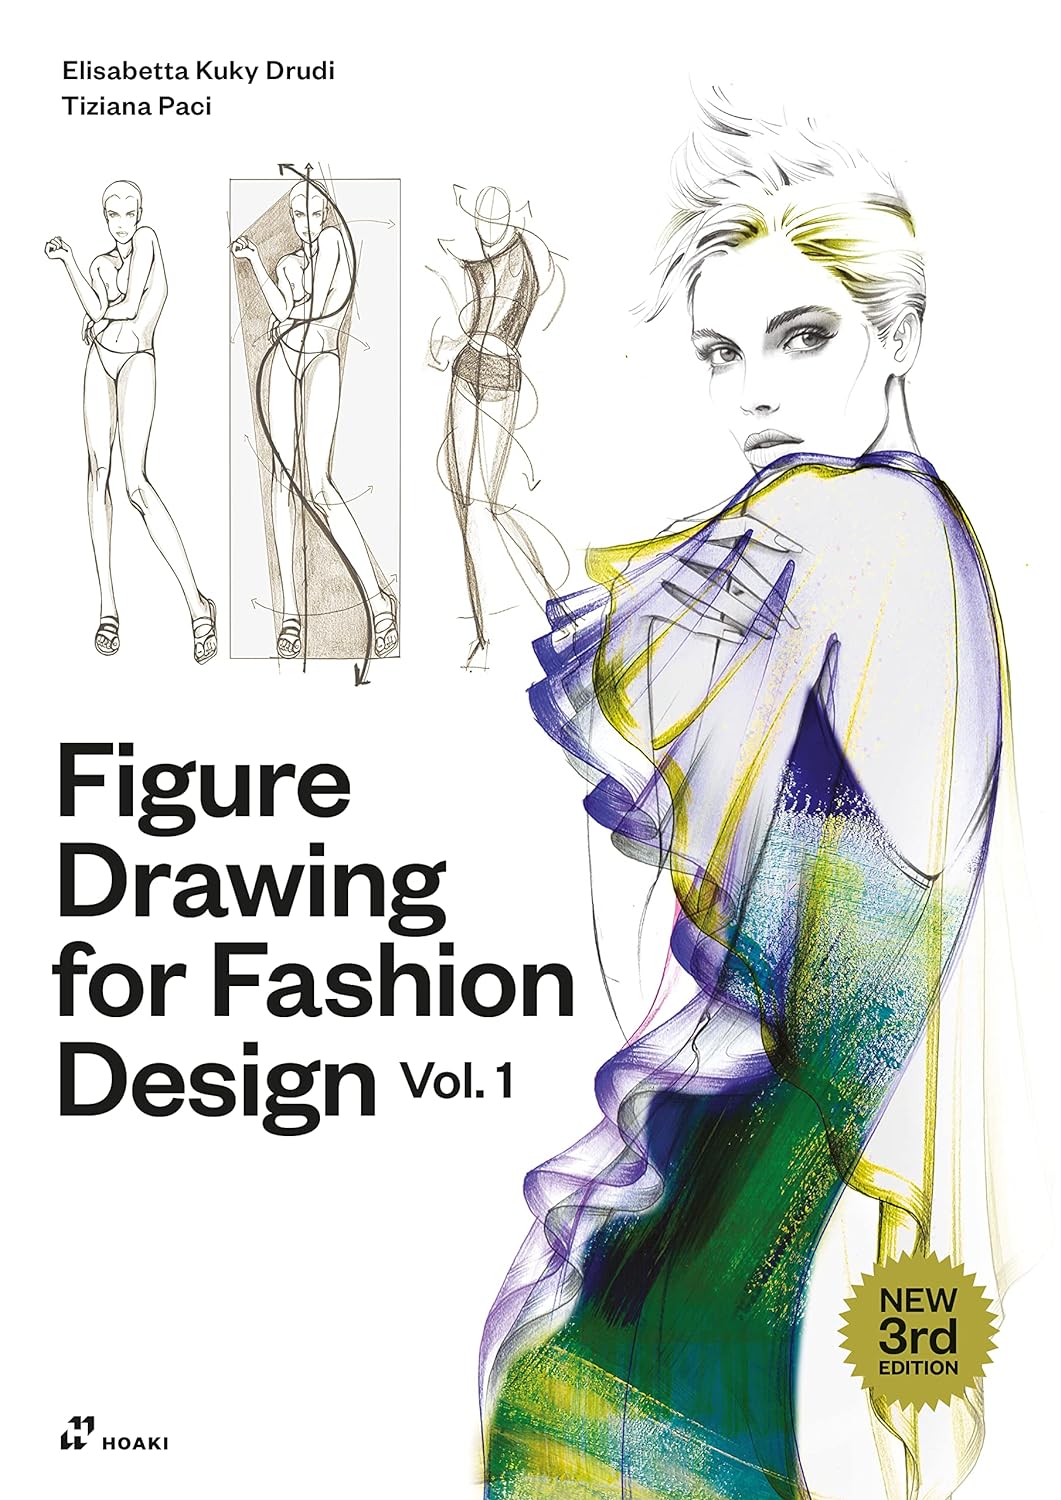 Figure Drawing for Fashion design Vol. 1